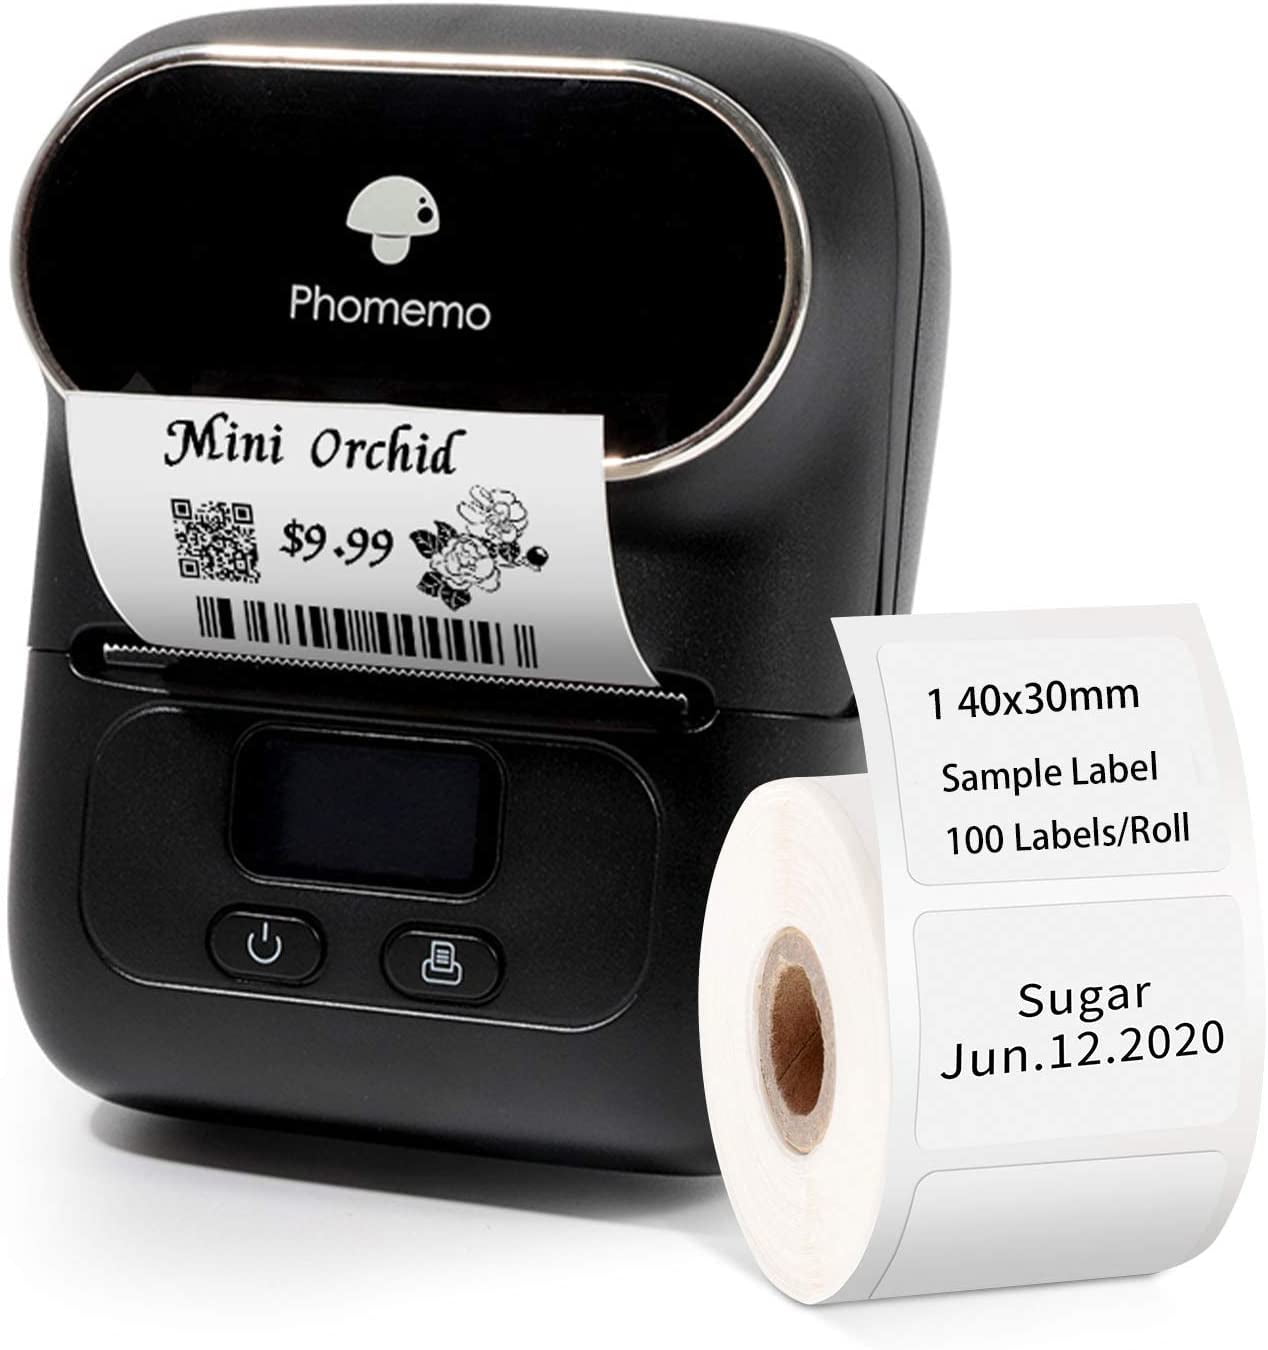 Phomemo M110 Label Makers - Portable Bluetooth Thermal Label Maker Printer  for Barcode, Clothing, Jewelry, Retail, Mailing, Compatible with Android &  iOS System, with 1pack 4030mm Label, Black 